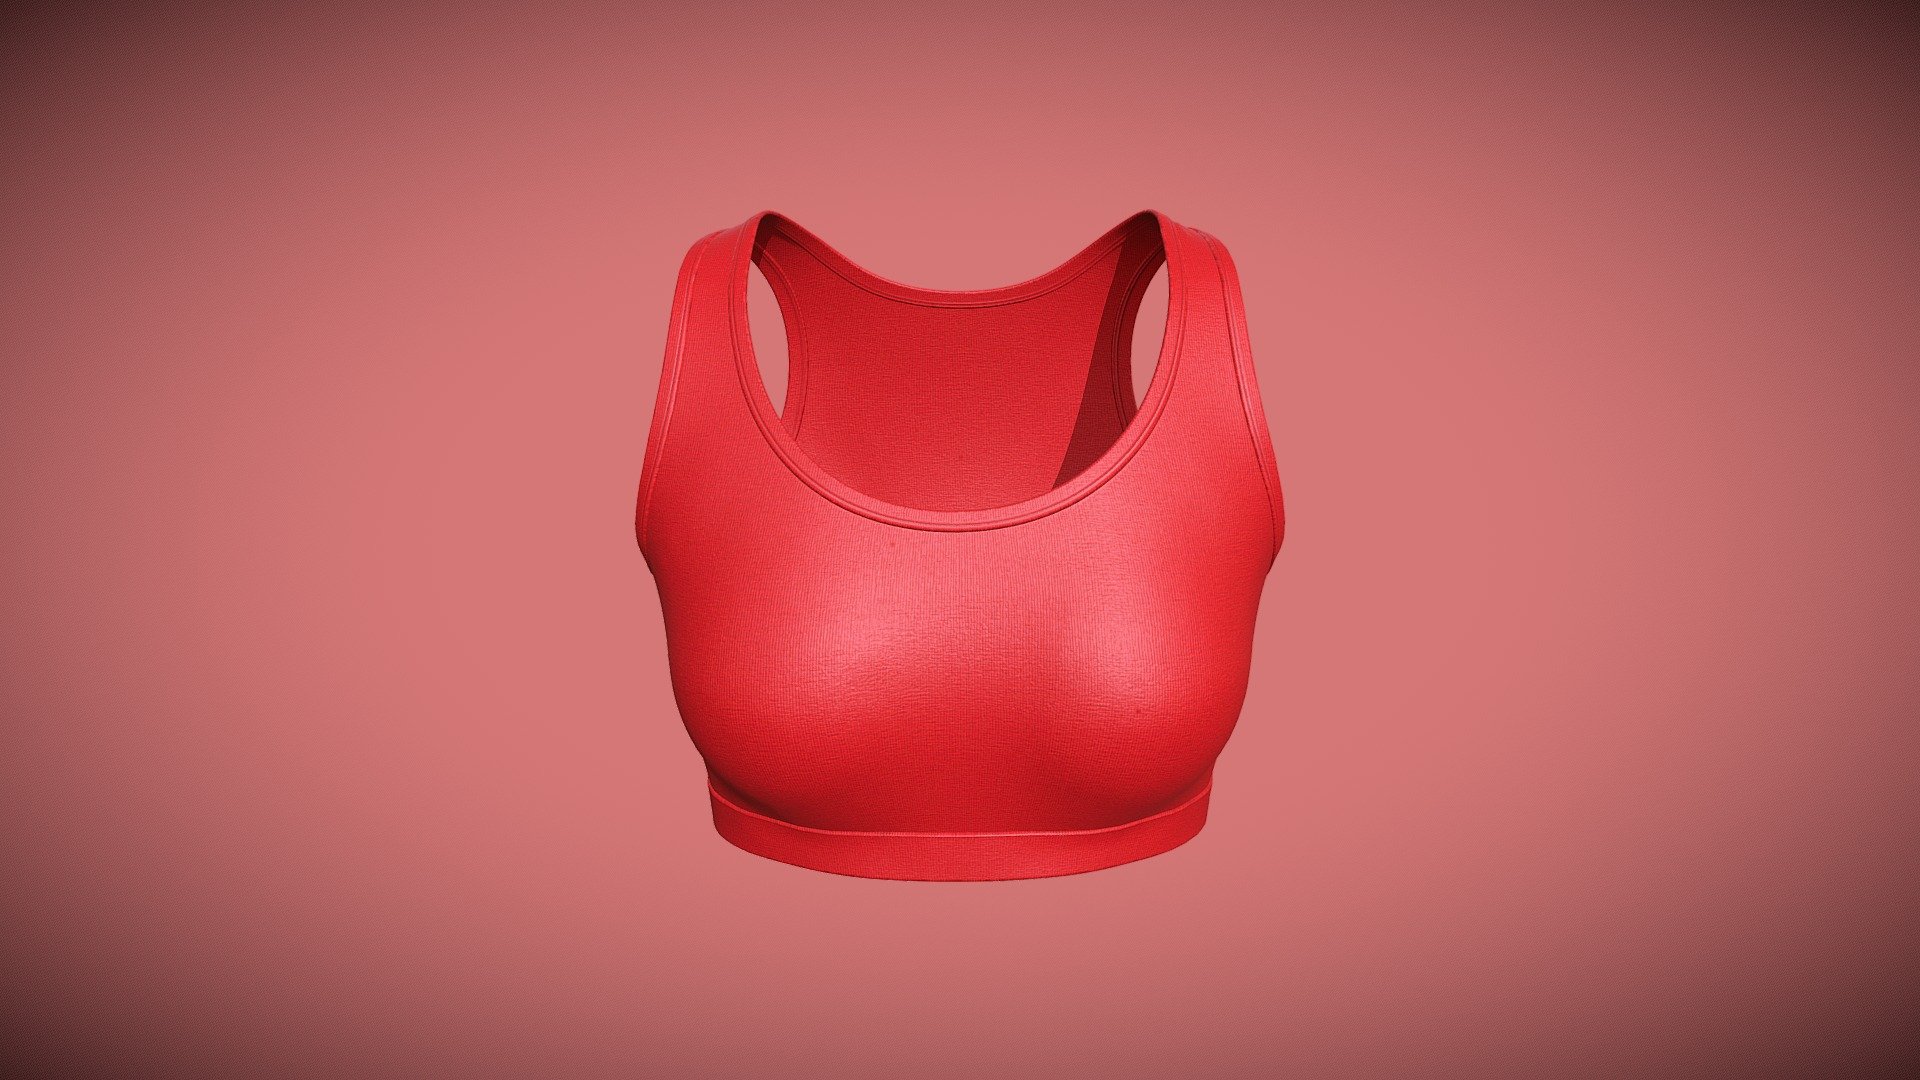 Cloth Title = Classic Sporty Premium Bra Design 

SKU = DG100033 

Category = Women 

Product Type = Bra 

Cloth Length = Regular 

Body Fit = Fitted  

Occasion = Activewear 


Our Services:

3D Apparel Design.

OBJ,FBX,GLTF Making with High/Low Poly.

Fabric Digitalization.

Mockup making.

3D Teck Pack.

Pattern Making.

2D Illustration.

Cloth Animation and 360 Spin Video.


Contact us:- 

Email: info@digitalfashionwear.com 

Website: https://digitalfashionwear.com 

WhatsApp No: +8801759350445 


We designed all the types of cloth specially focused on product visualization, e-commerce, fitting, and production. 

We will design: 

T-shirts 

Polo shirts 

Hoodies 

Sweatshirt 

Jackets 

Shirts 

TankTops 

Trousers 

Bras 

Underwear 

Blazer 

Aprons 

Leggings 

and All Fashion items. 





Our goal is to make sure what we provide you, meets your demand 3d model